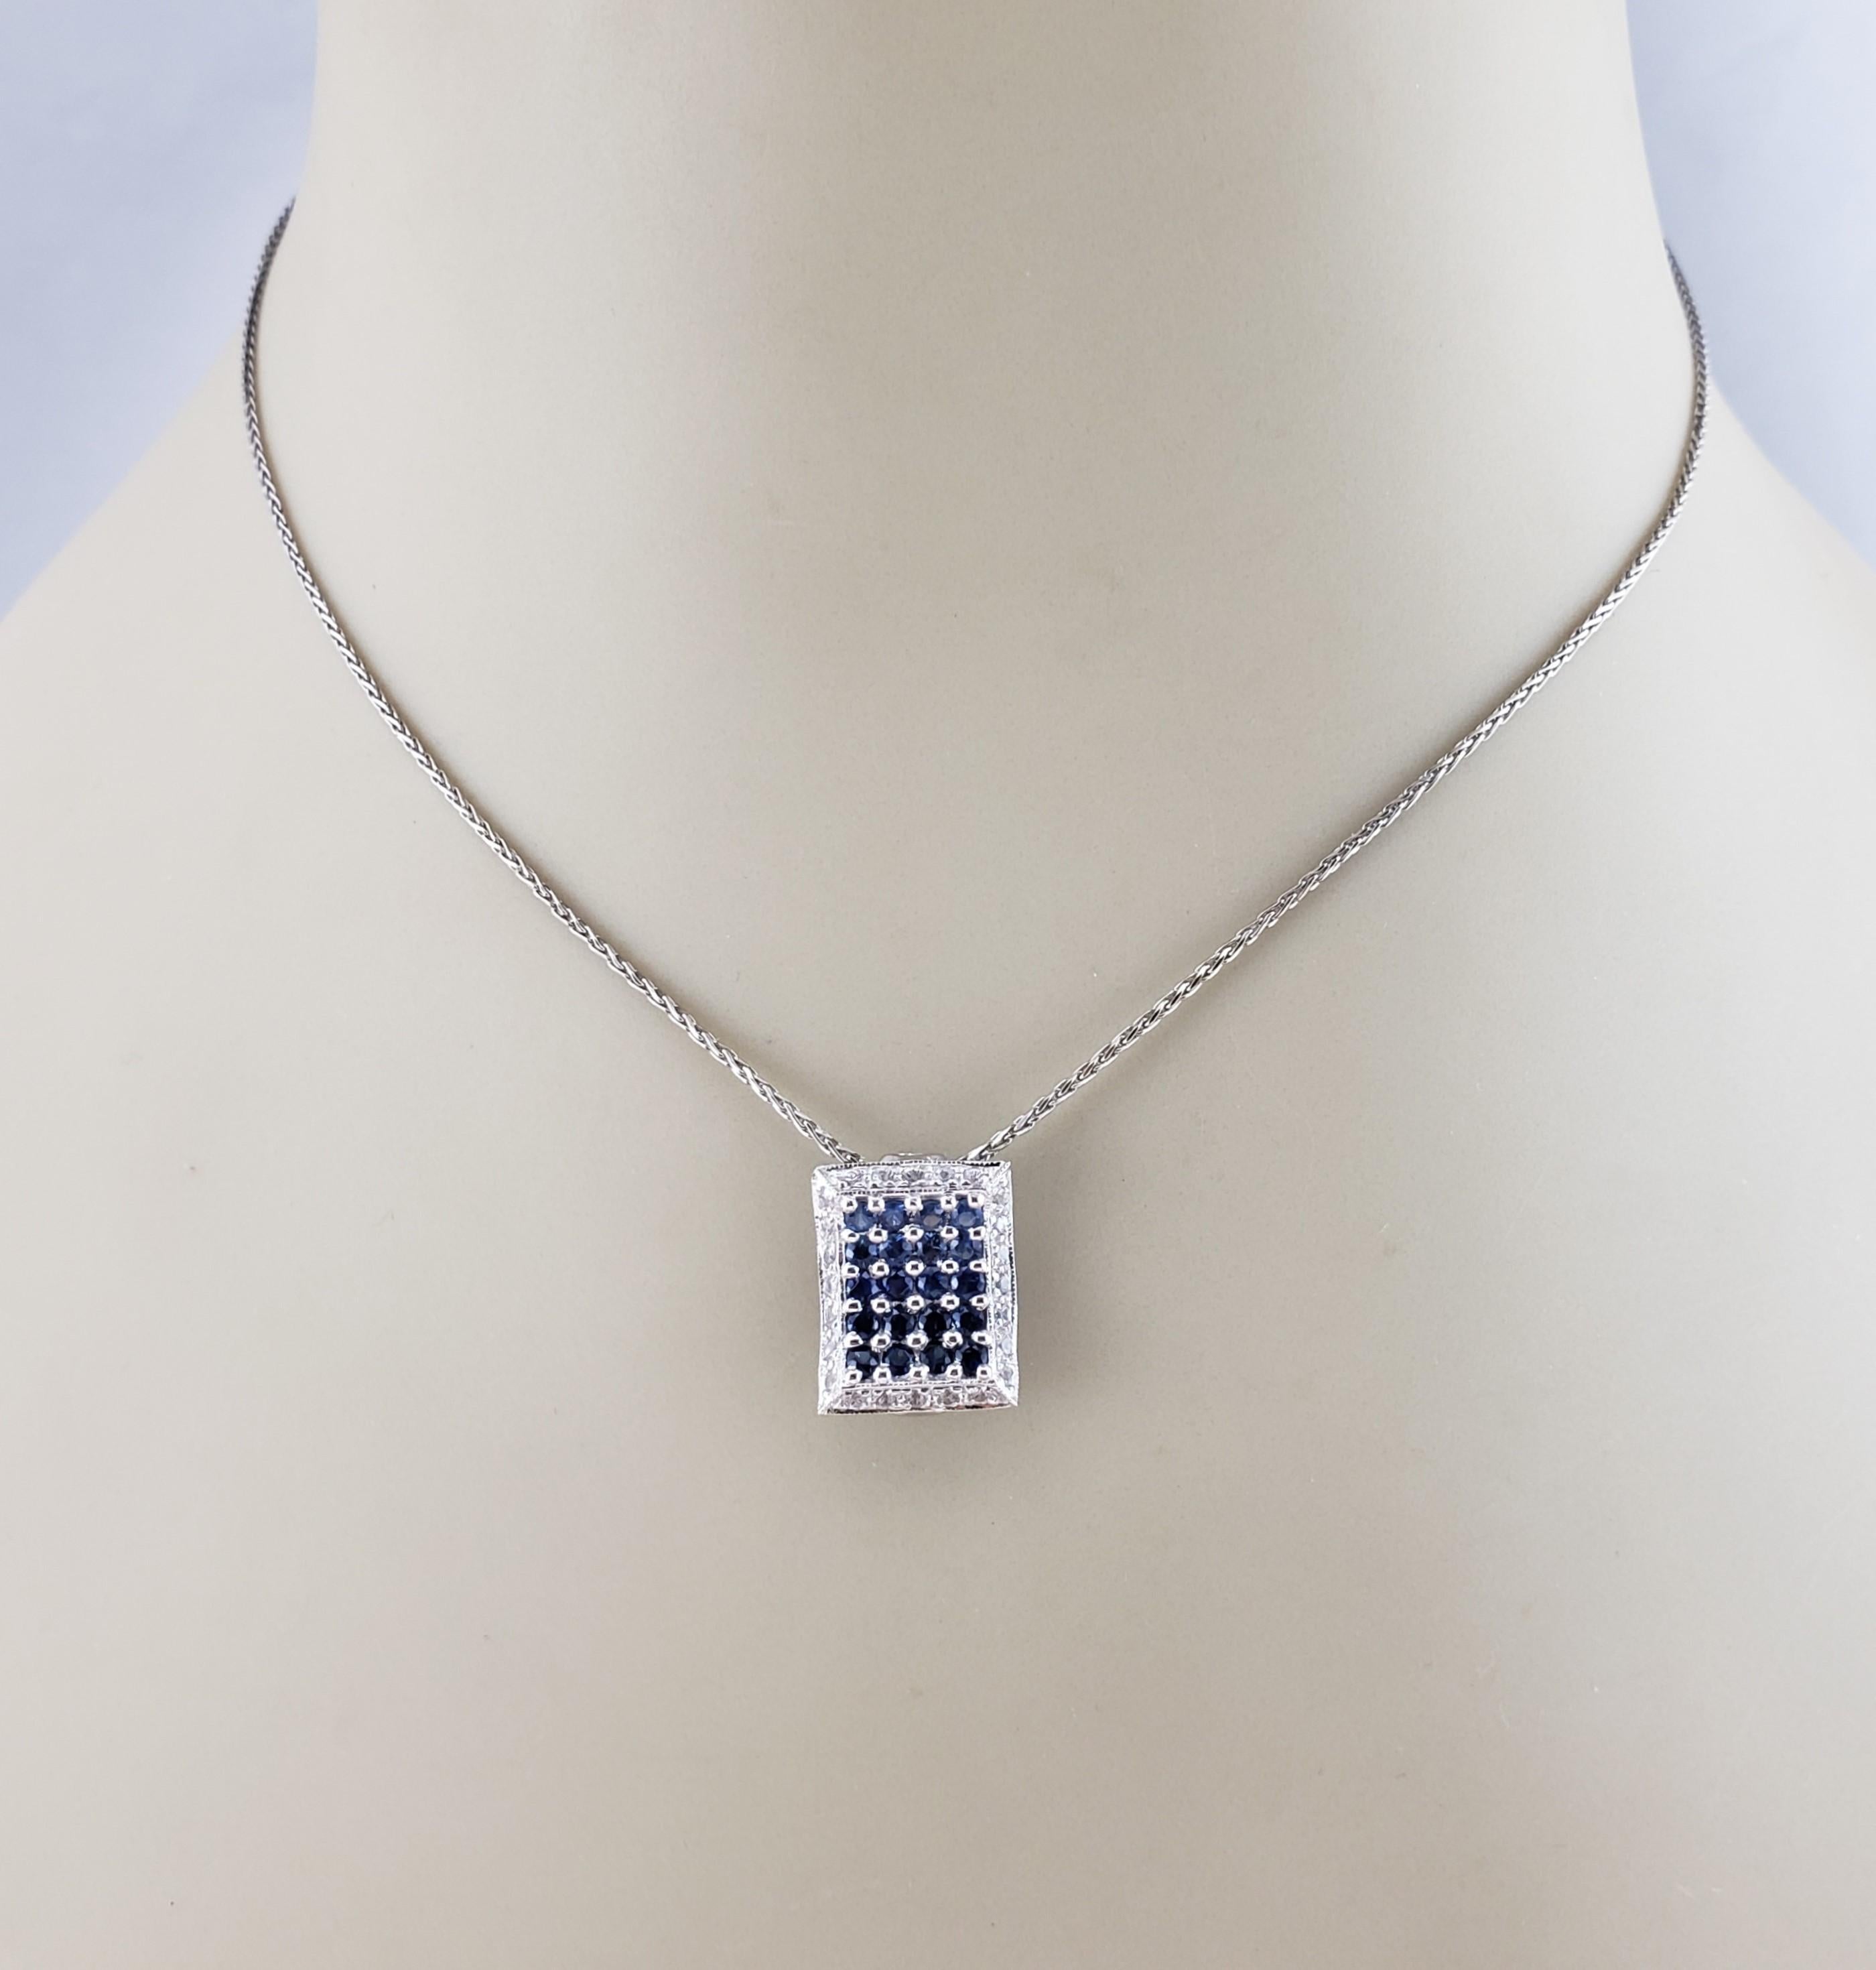  14K WG Blue and White Sapphire Pendant Necklace #15573 For Sale 2